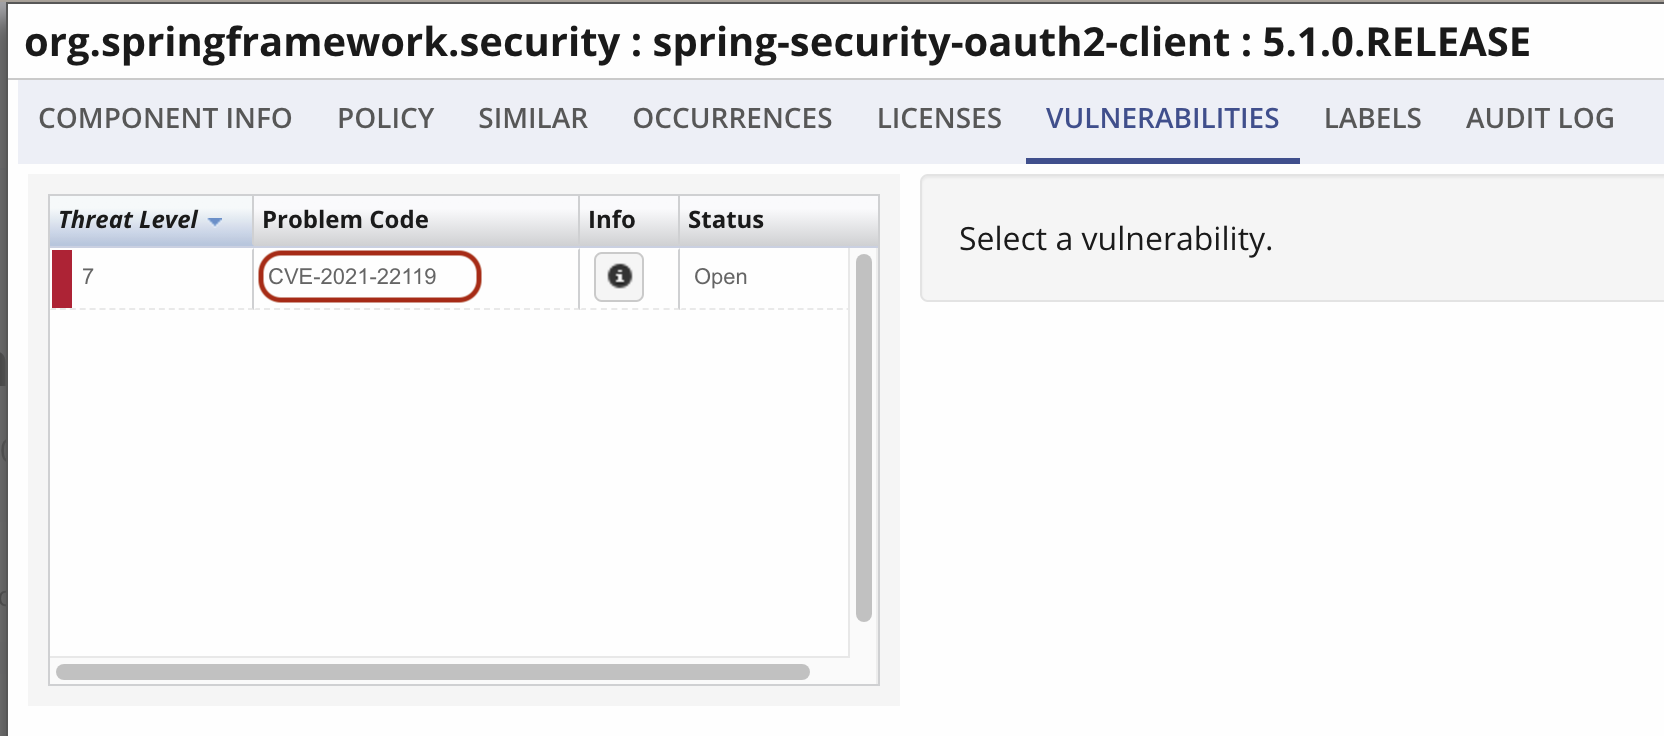 spring-security-oauth2-client version 5.1.0.RELEASE vulnerable to CVE-2021-22119